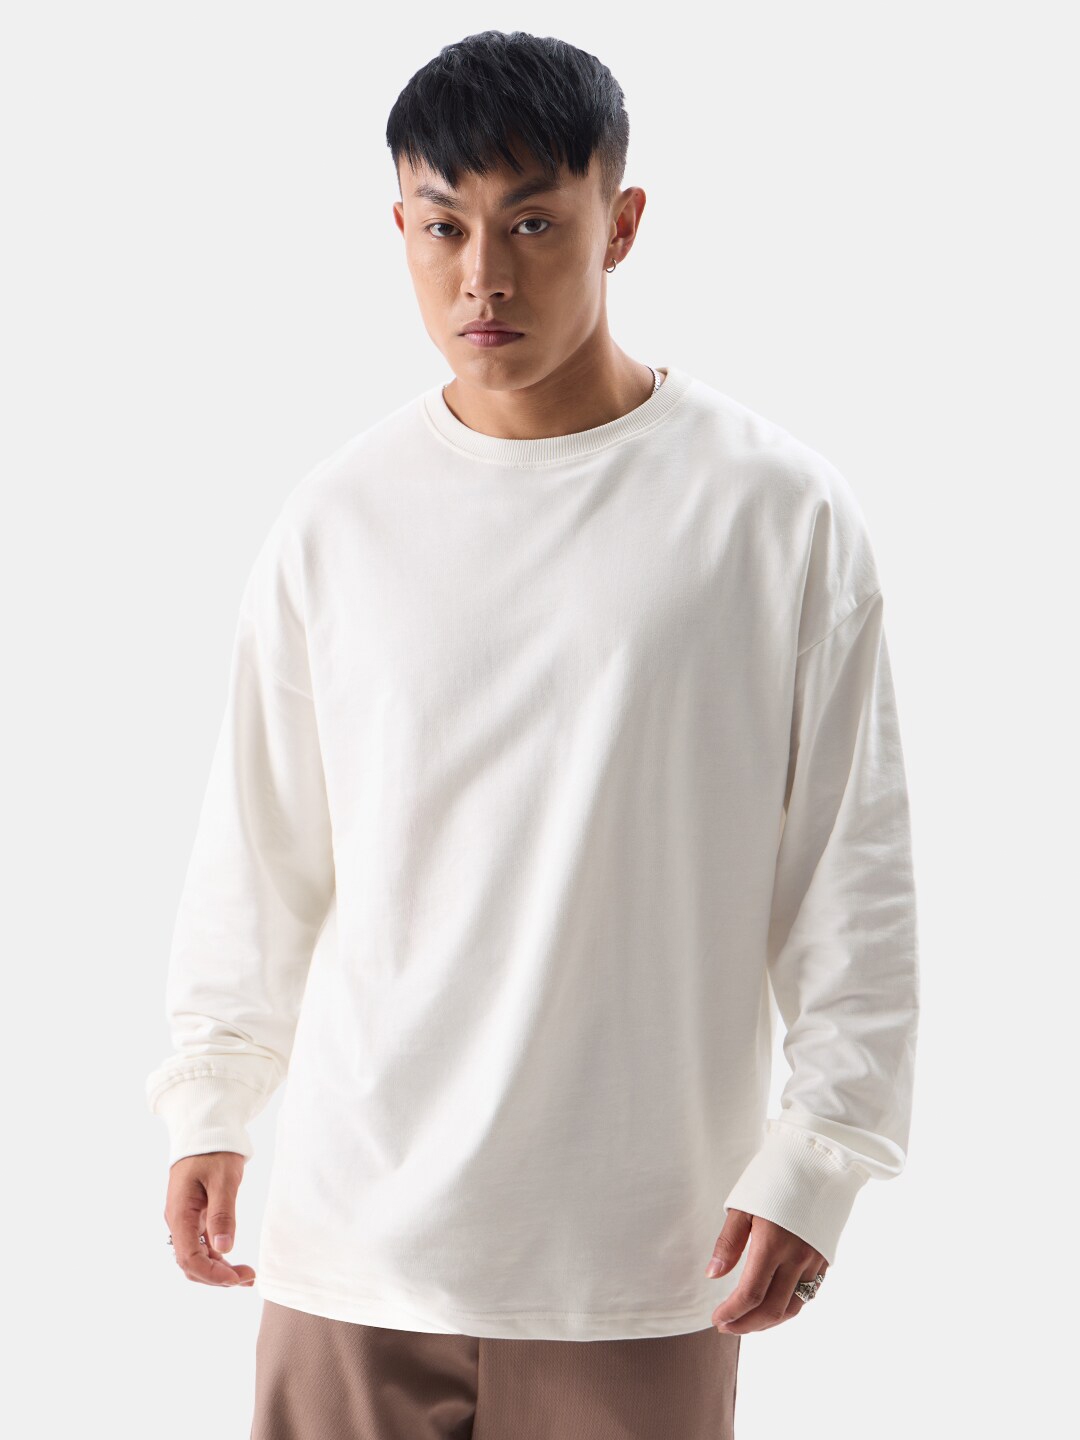 The Souled Store Solid Men Round Neck White T-shirt